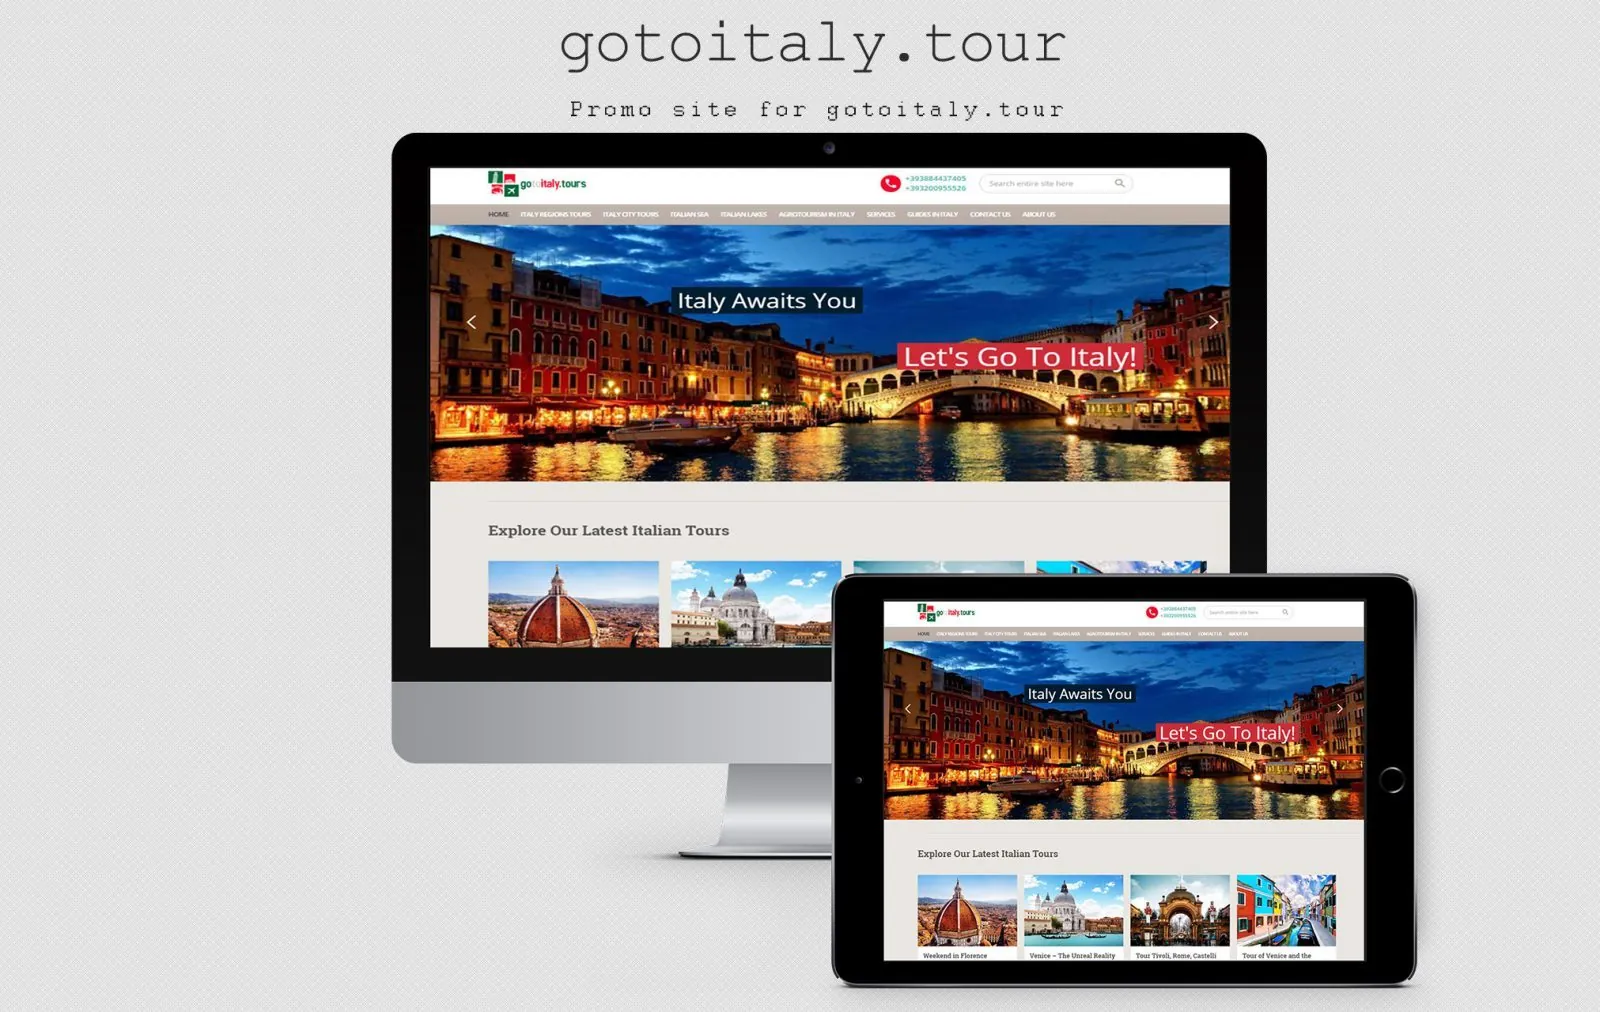 Travel site - Go to Italy Tours 1